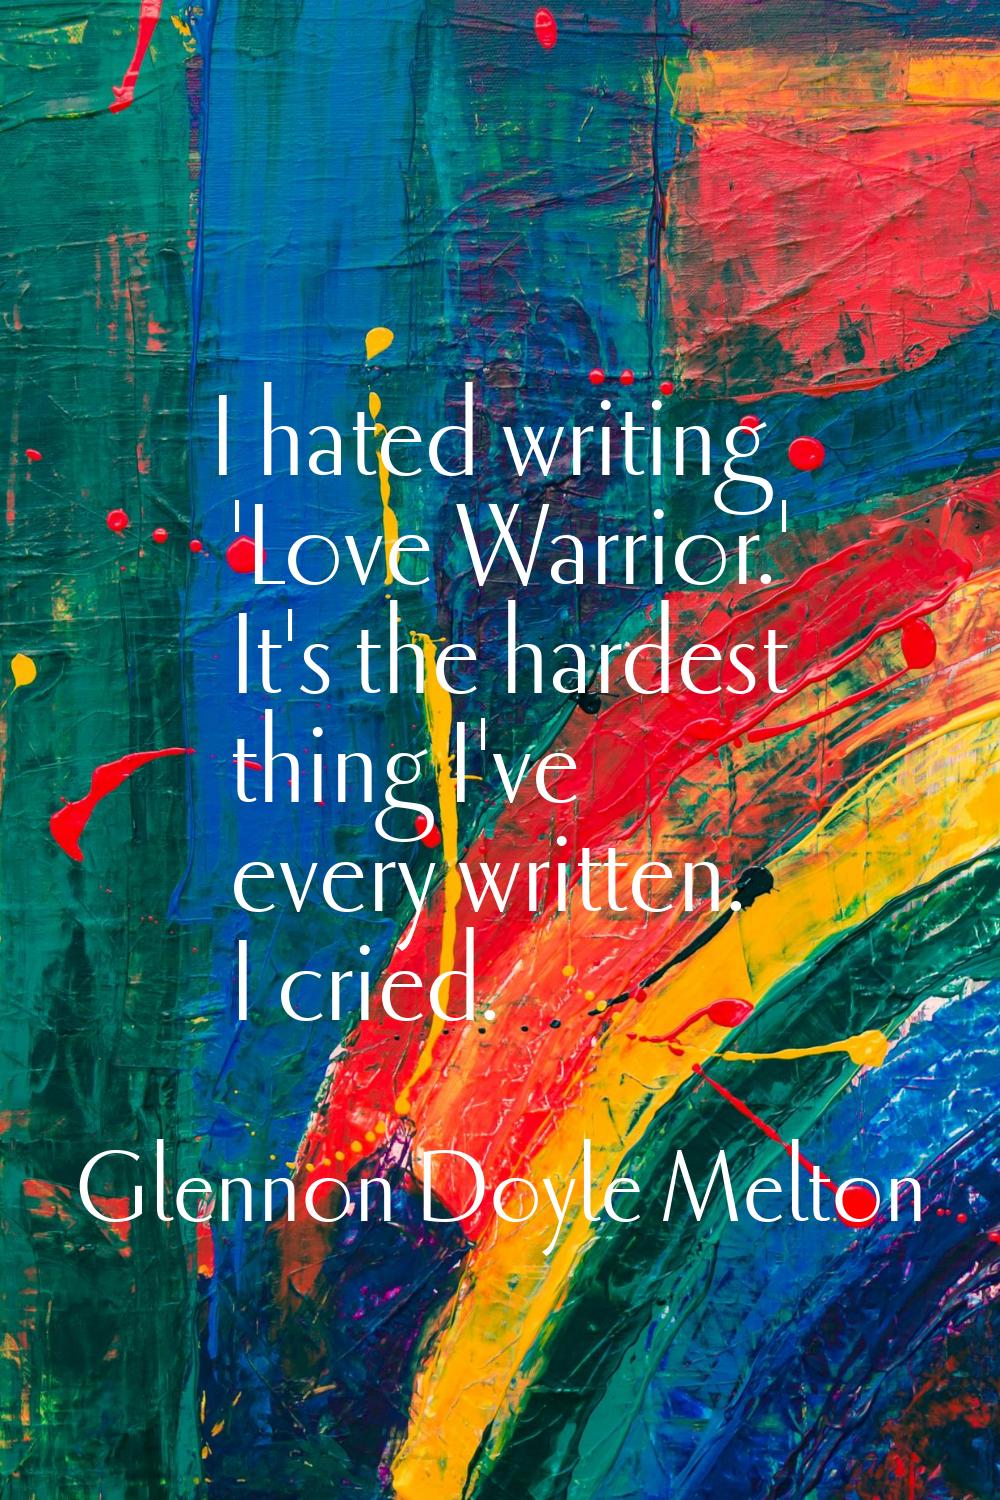 I hated writing 'Love Warrior.' It's the hardest thing I've every written. I cried.